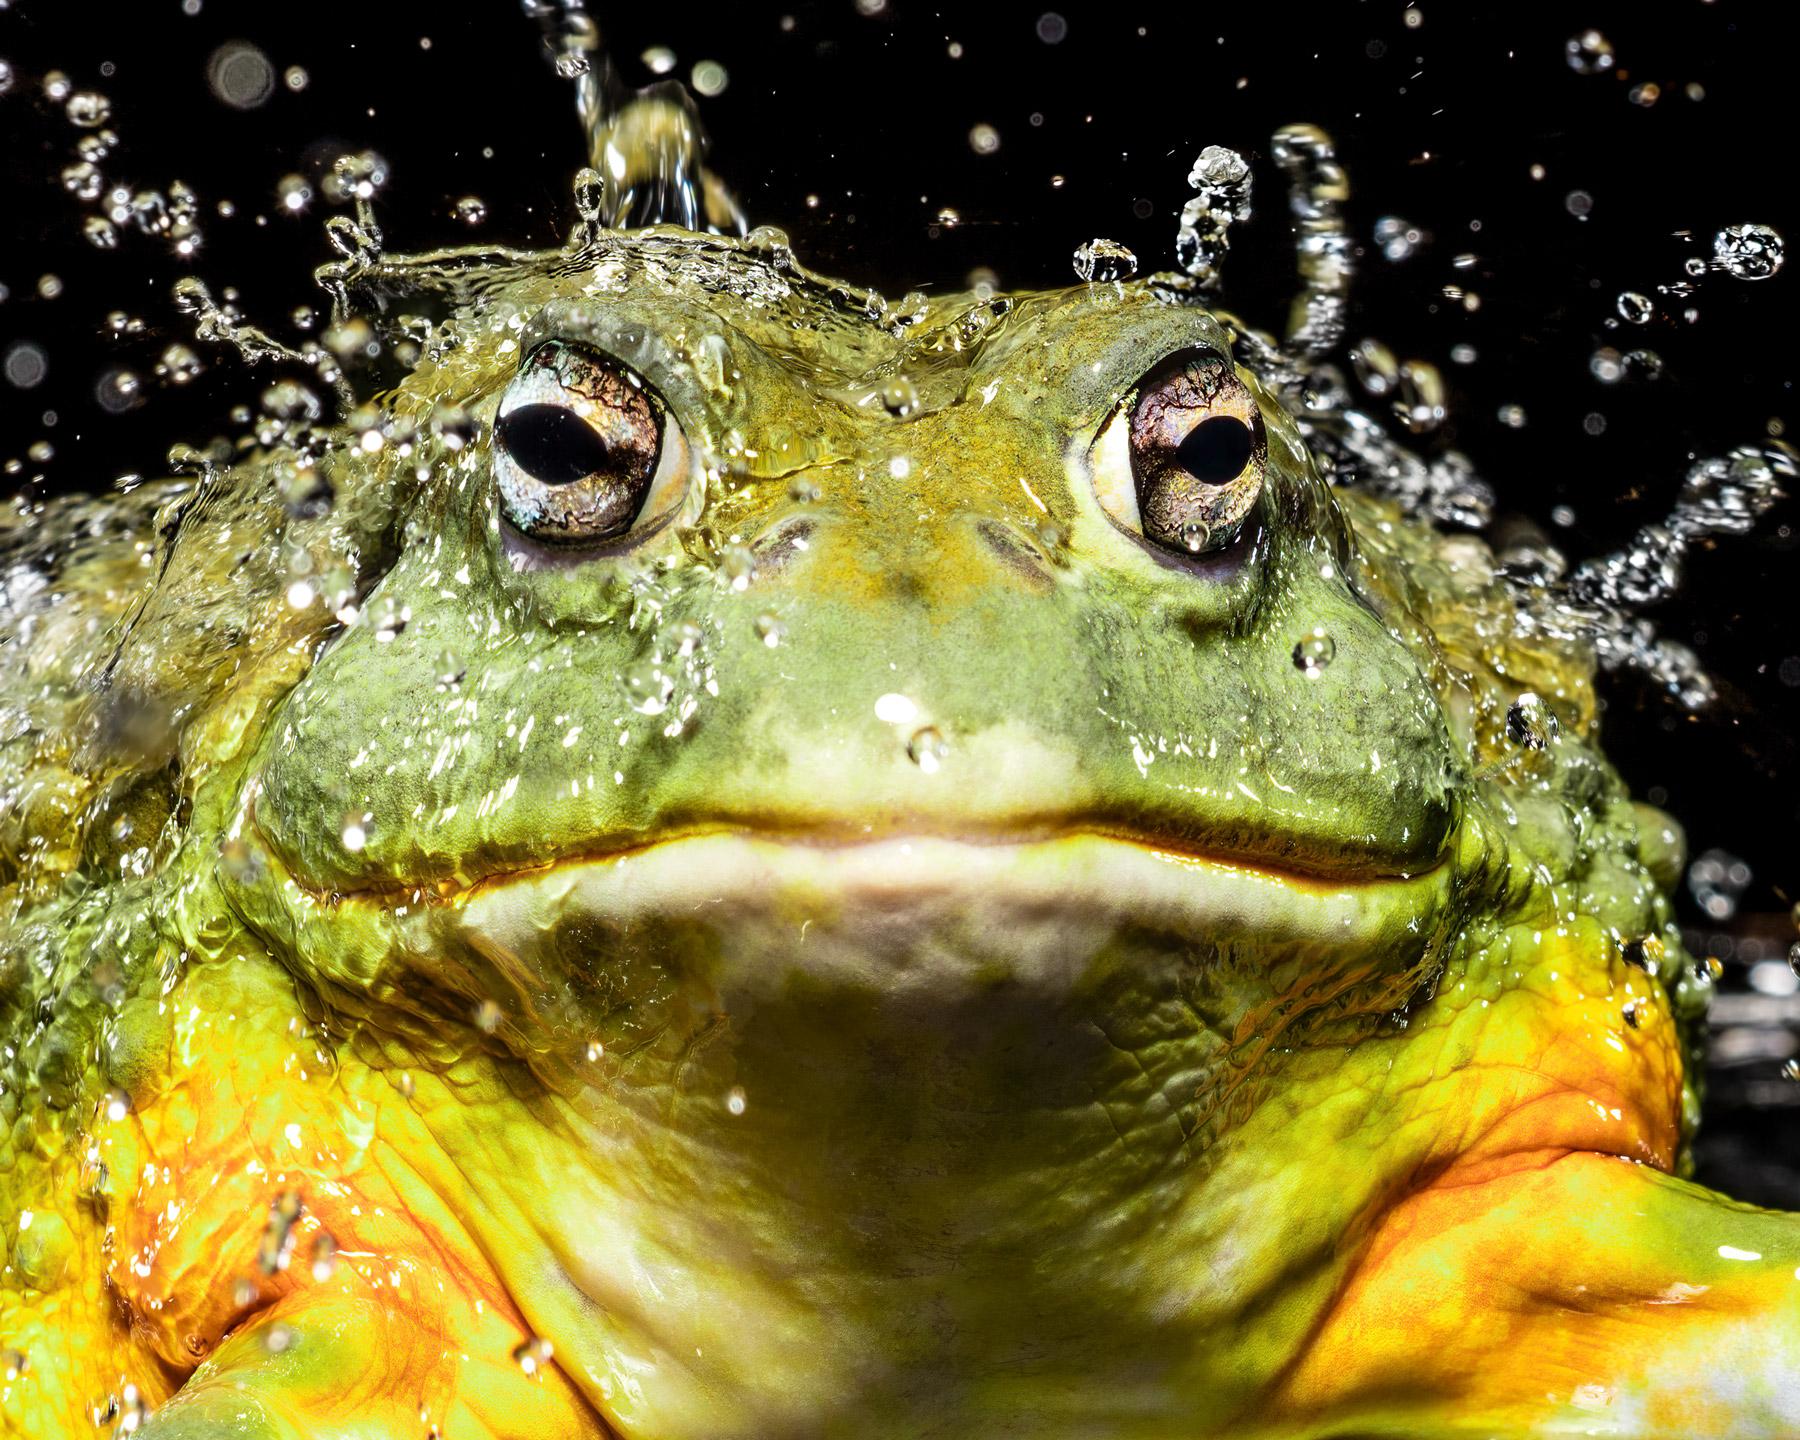 Bullfrog #1 -  Signed limited edition archival pigment print  -  Edition of 10

Animal photography is about being ready for the split-second moment when it happens. This takes a certain amount of production. The studio set-up, the lighting and the